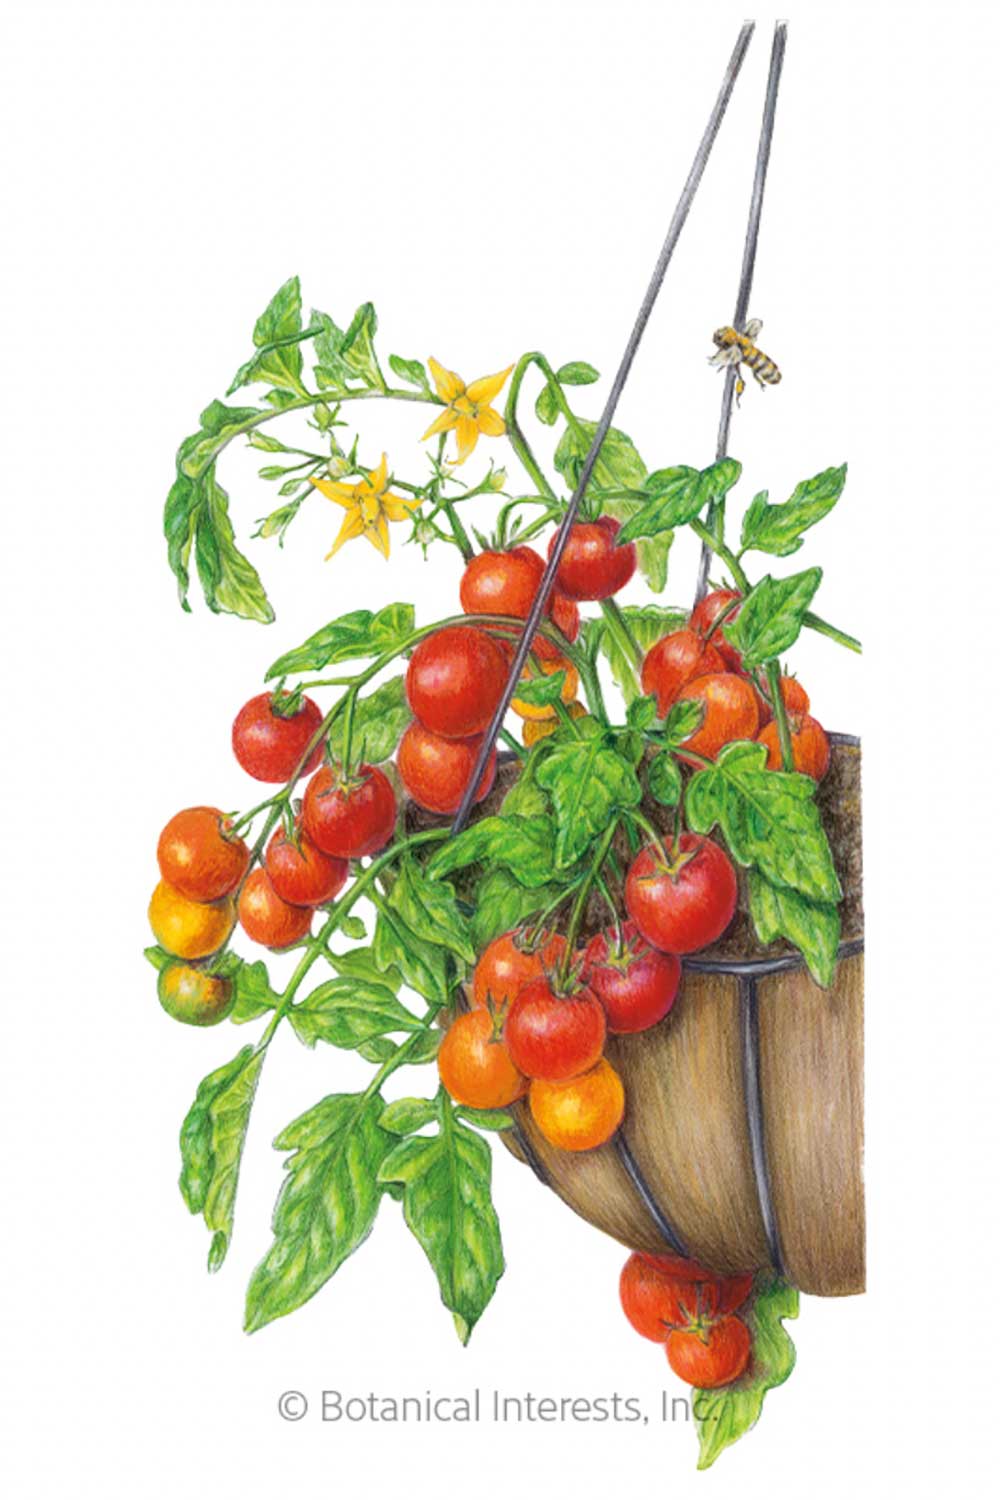 dwarf-cherry-tomatoes-for-small-space-gardening